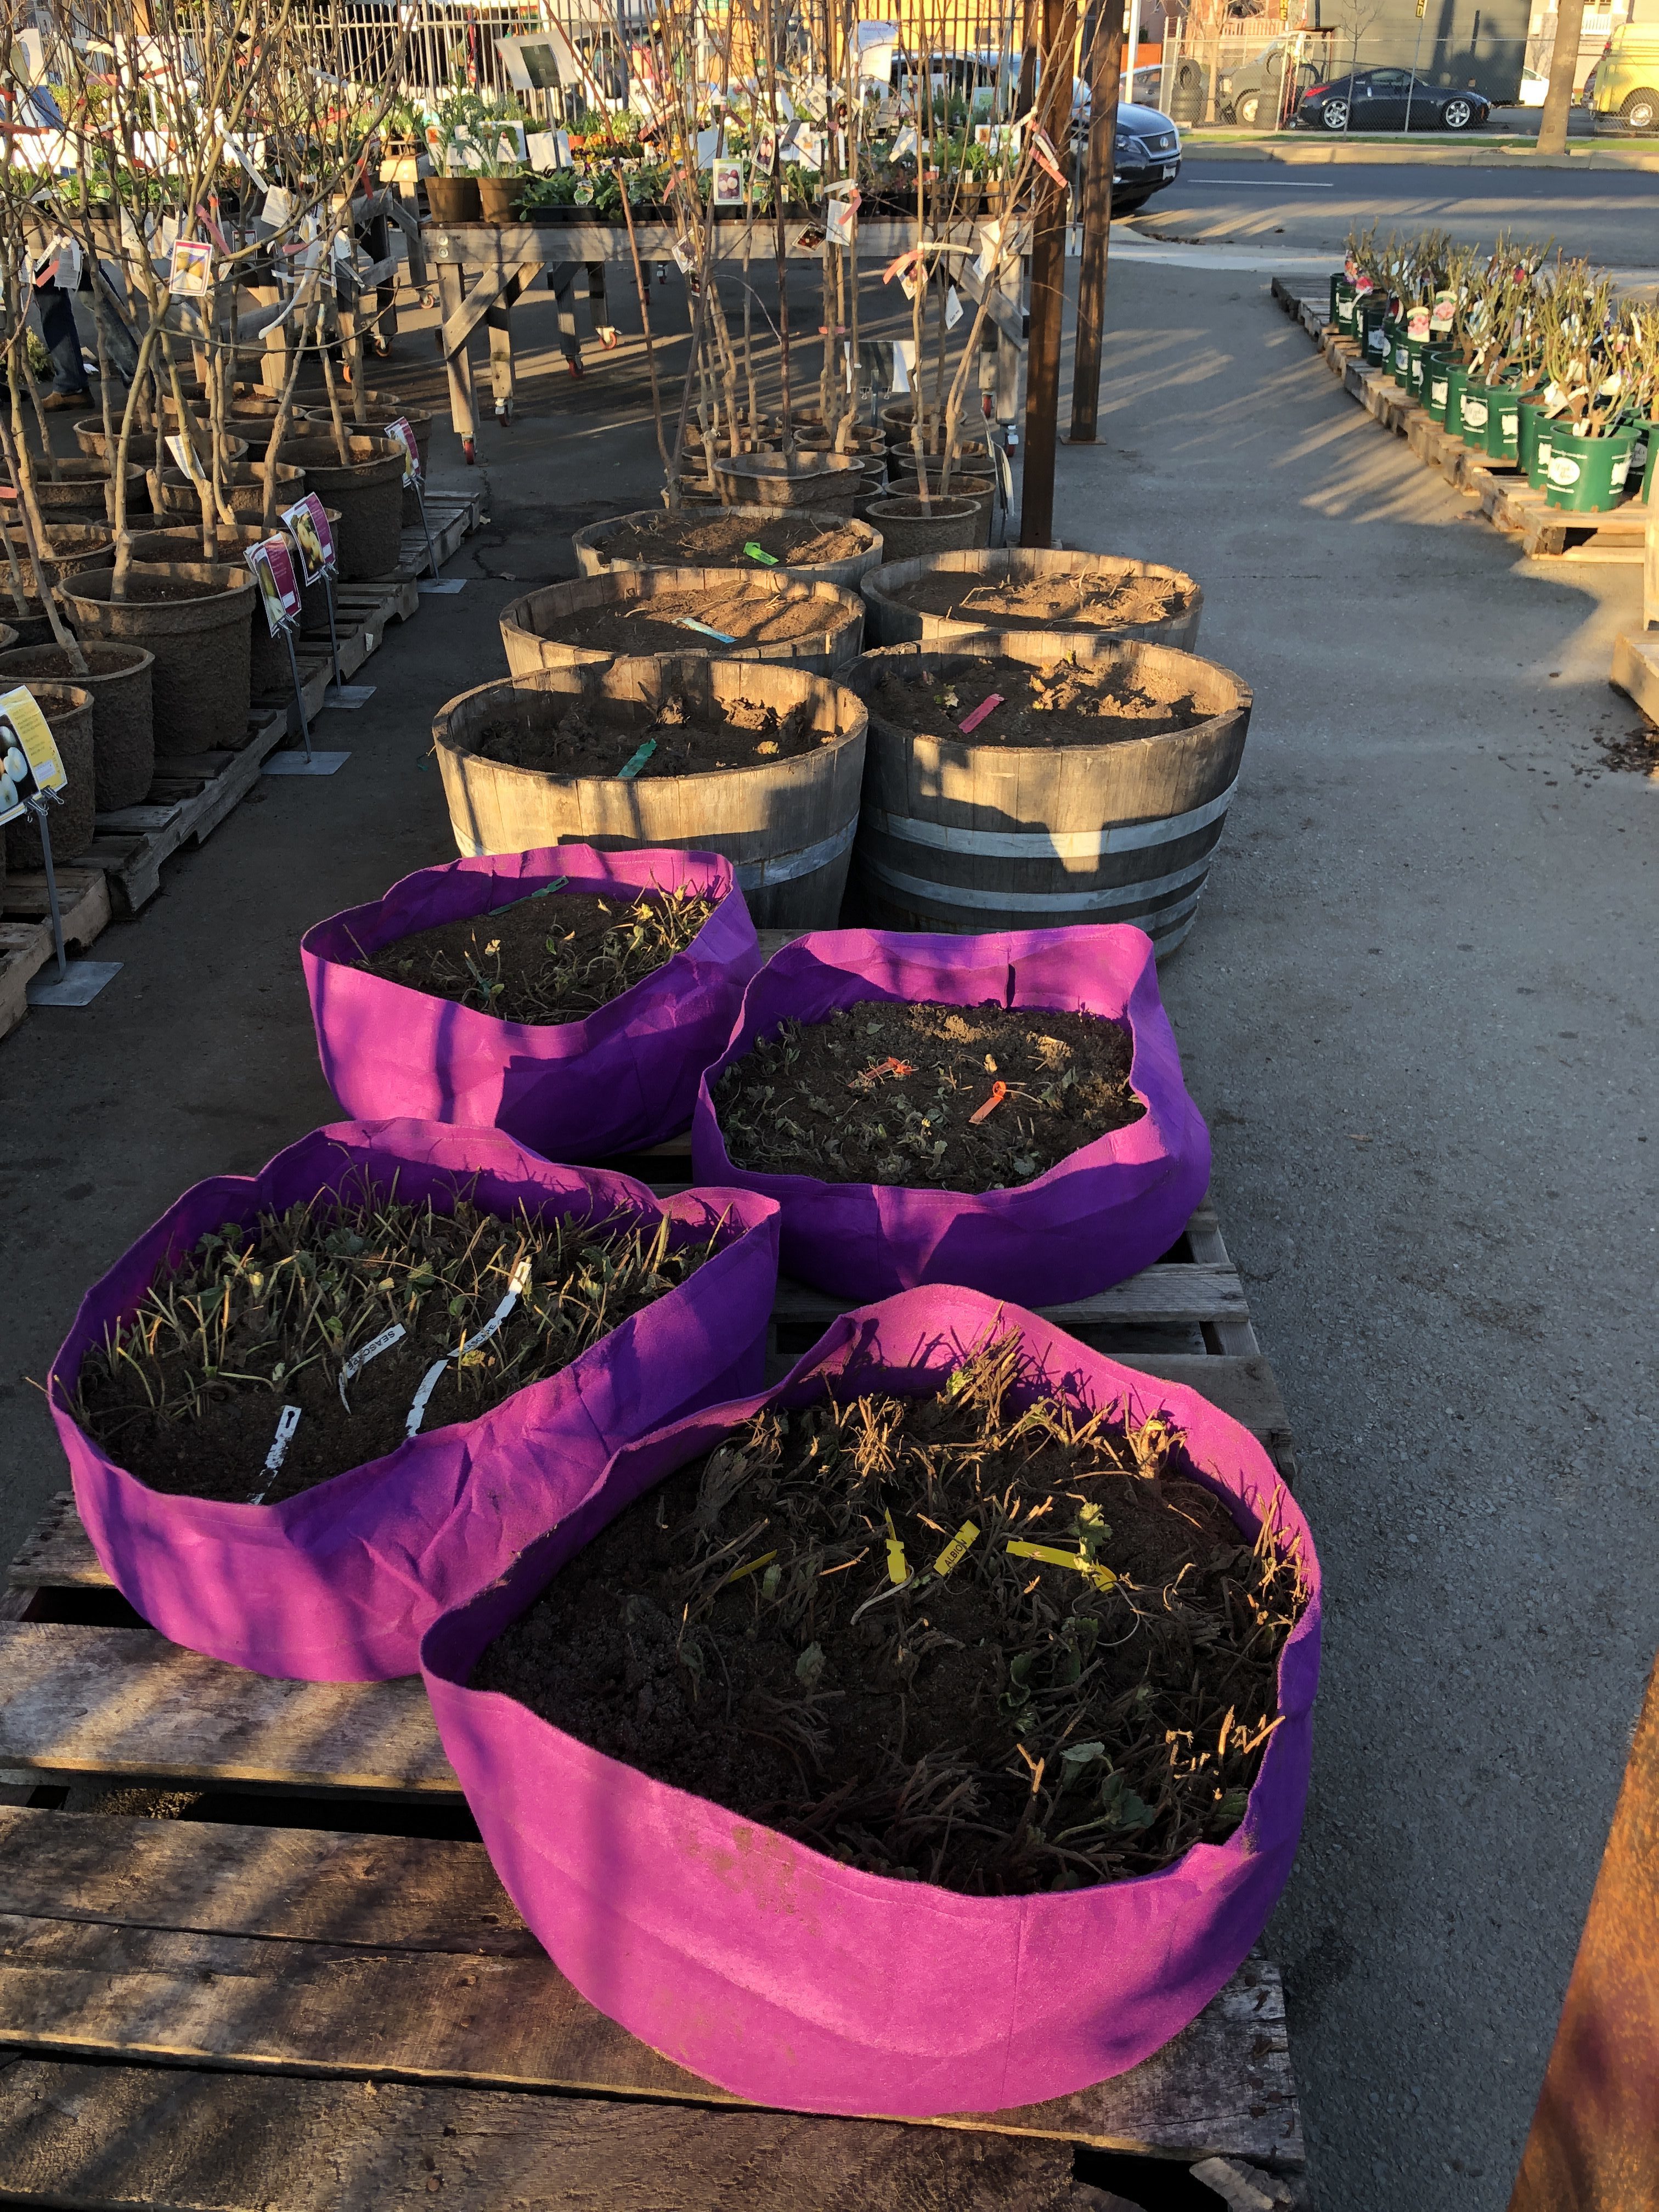 Last chance to plant, prune and spray dormant plants!